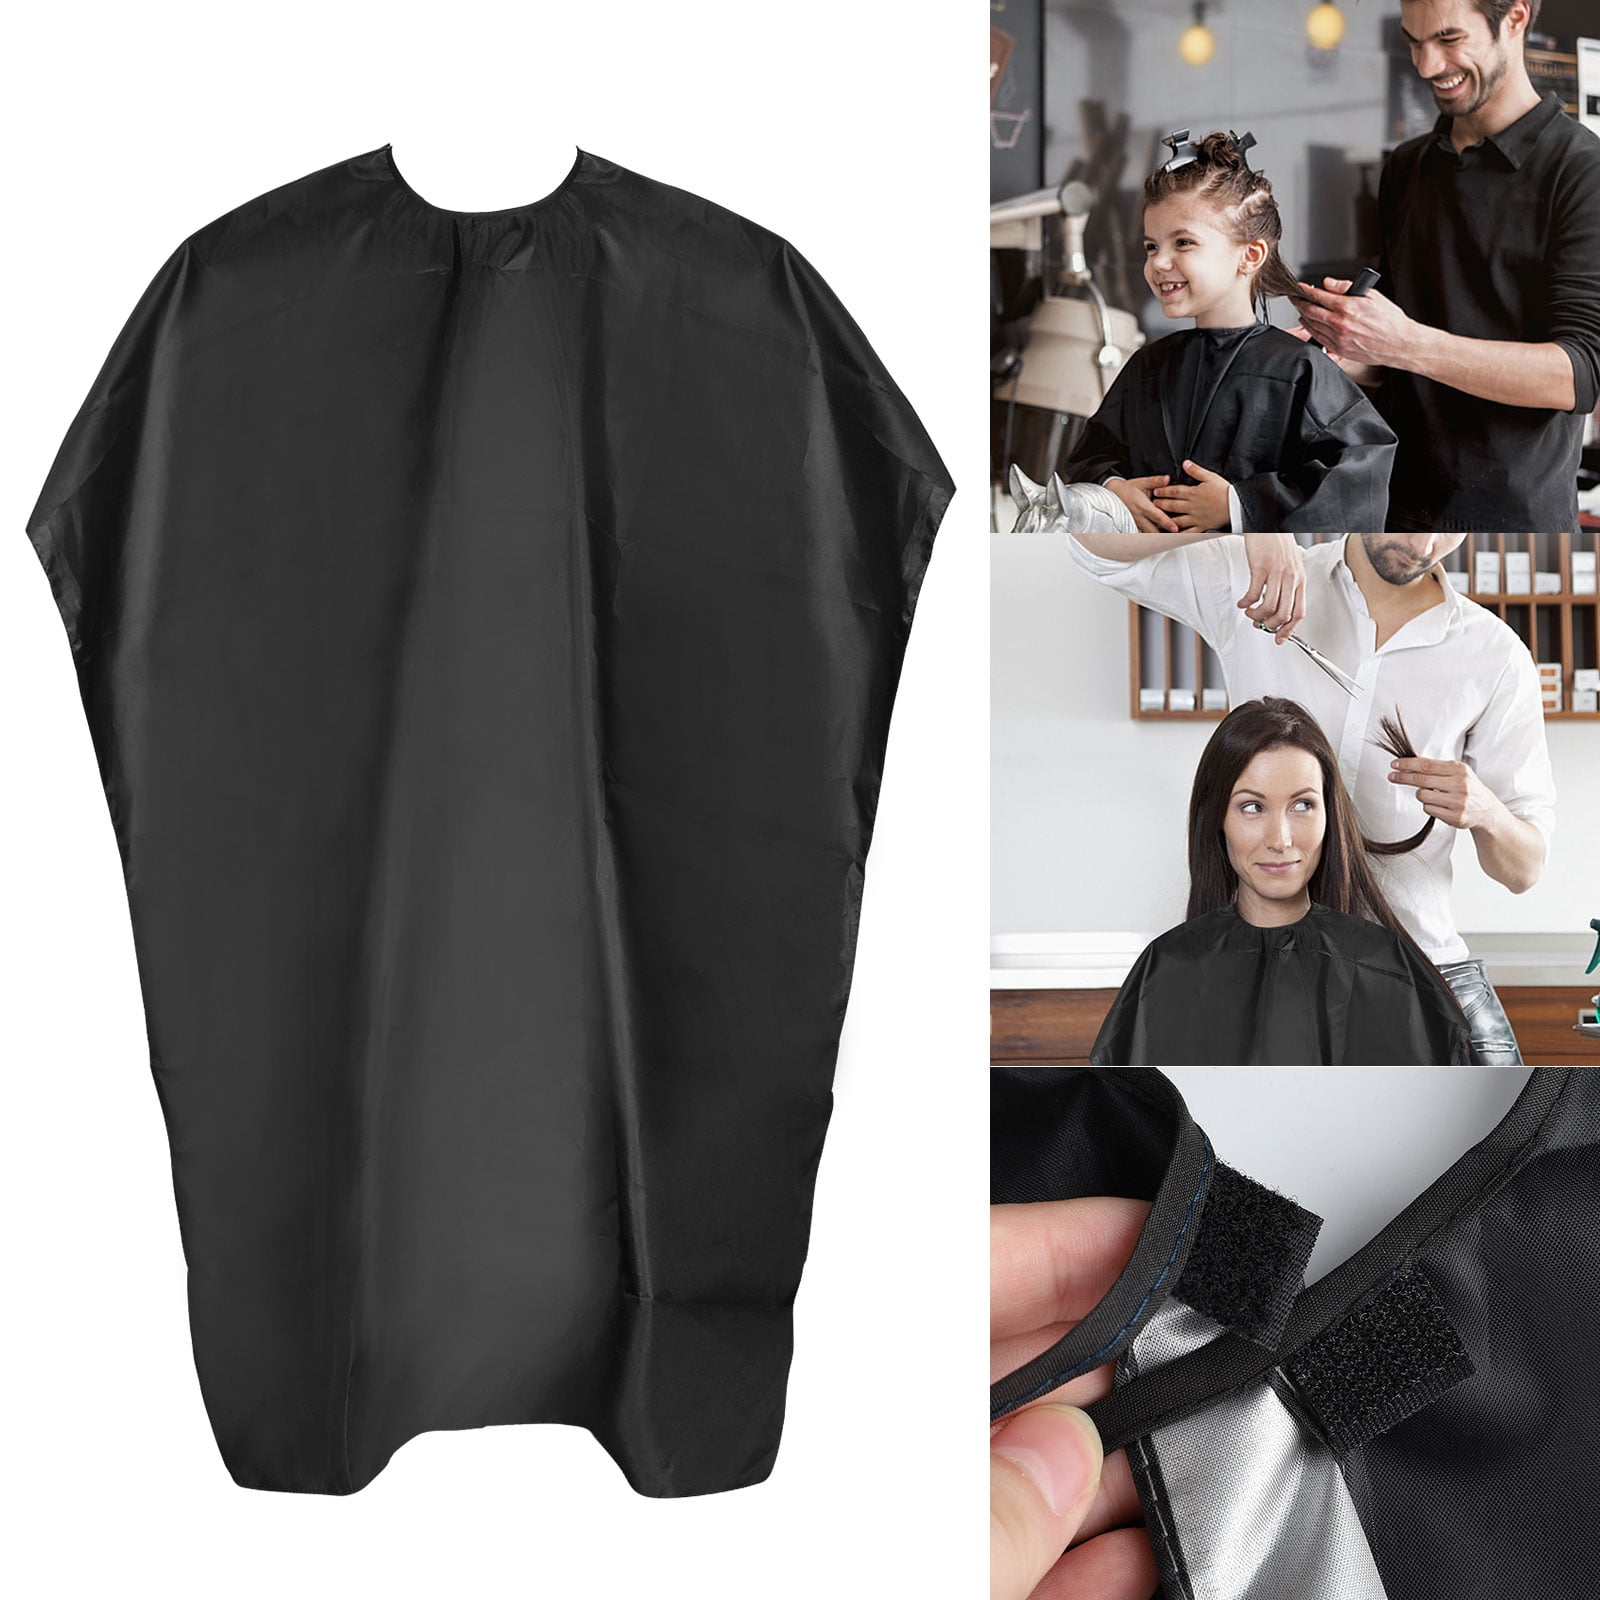 Hair Haircut Cape Hairdressing Barber Cape Cloth Dress Coat Hairdressing  Cape Adult Men Beard Cutting Dyeing Hair Professional Hairdressing Salon  Tool